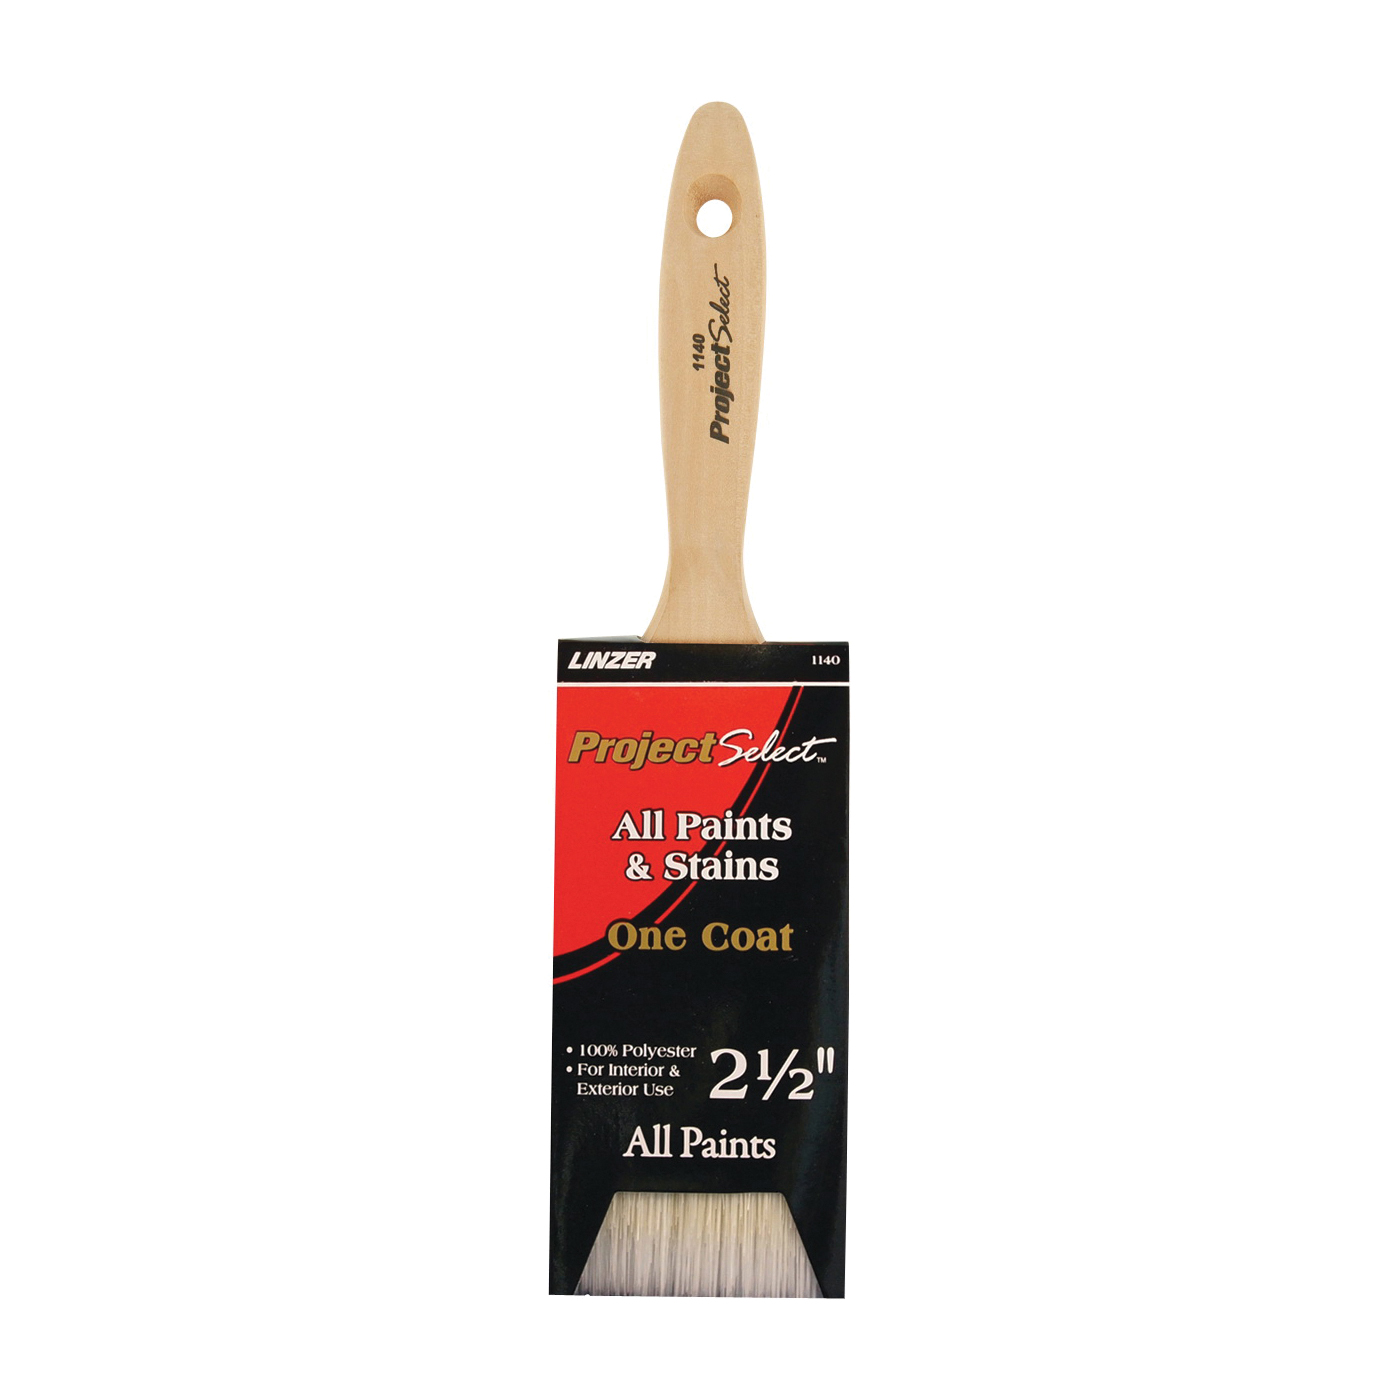 Linzer WC 1140-2.5 Paint Brush, 2-1/2 in W, 3 in L Bristle, Varnish Handle